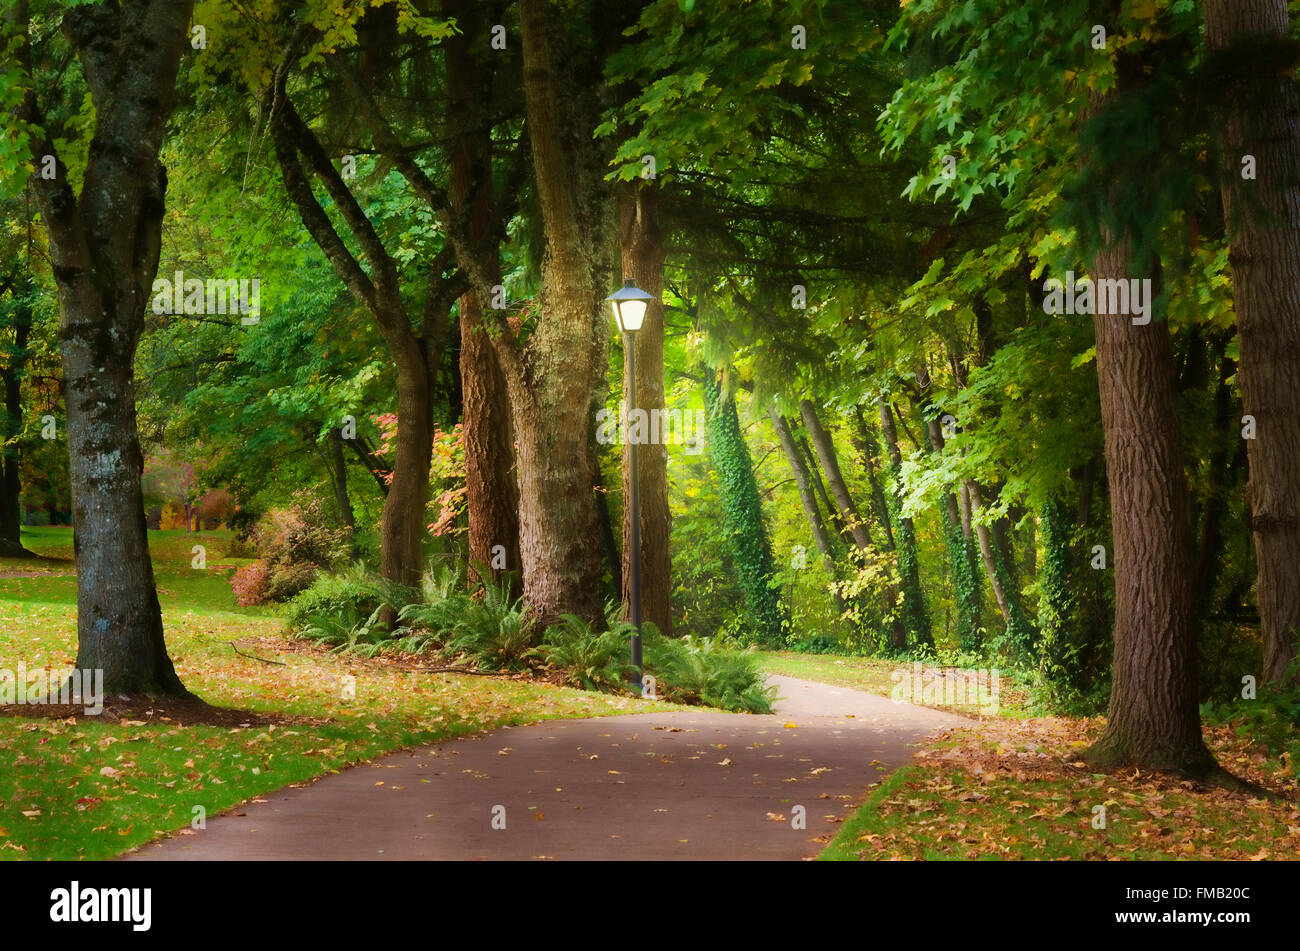 A glowing lamp post at the edge of a fantasy woodland path beckons the viewer to enter on an journey filled with new beginnings. Stock Photo